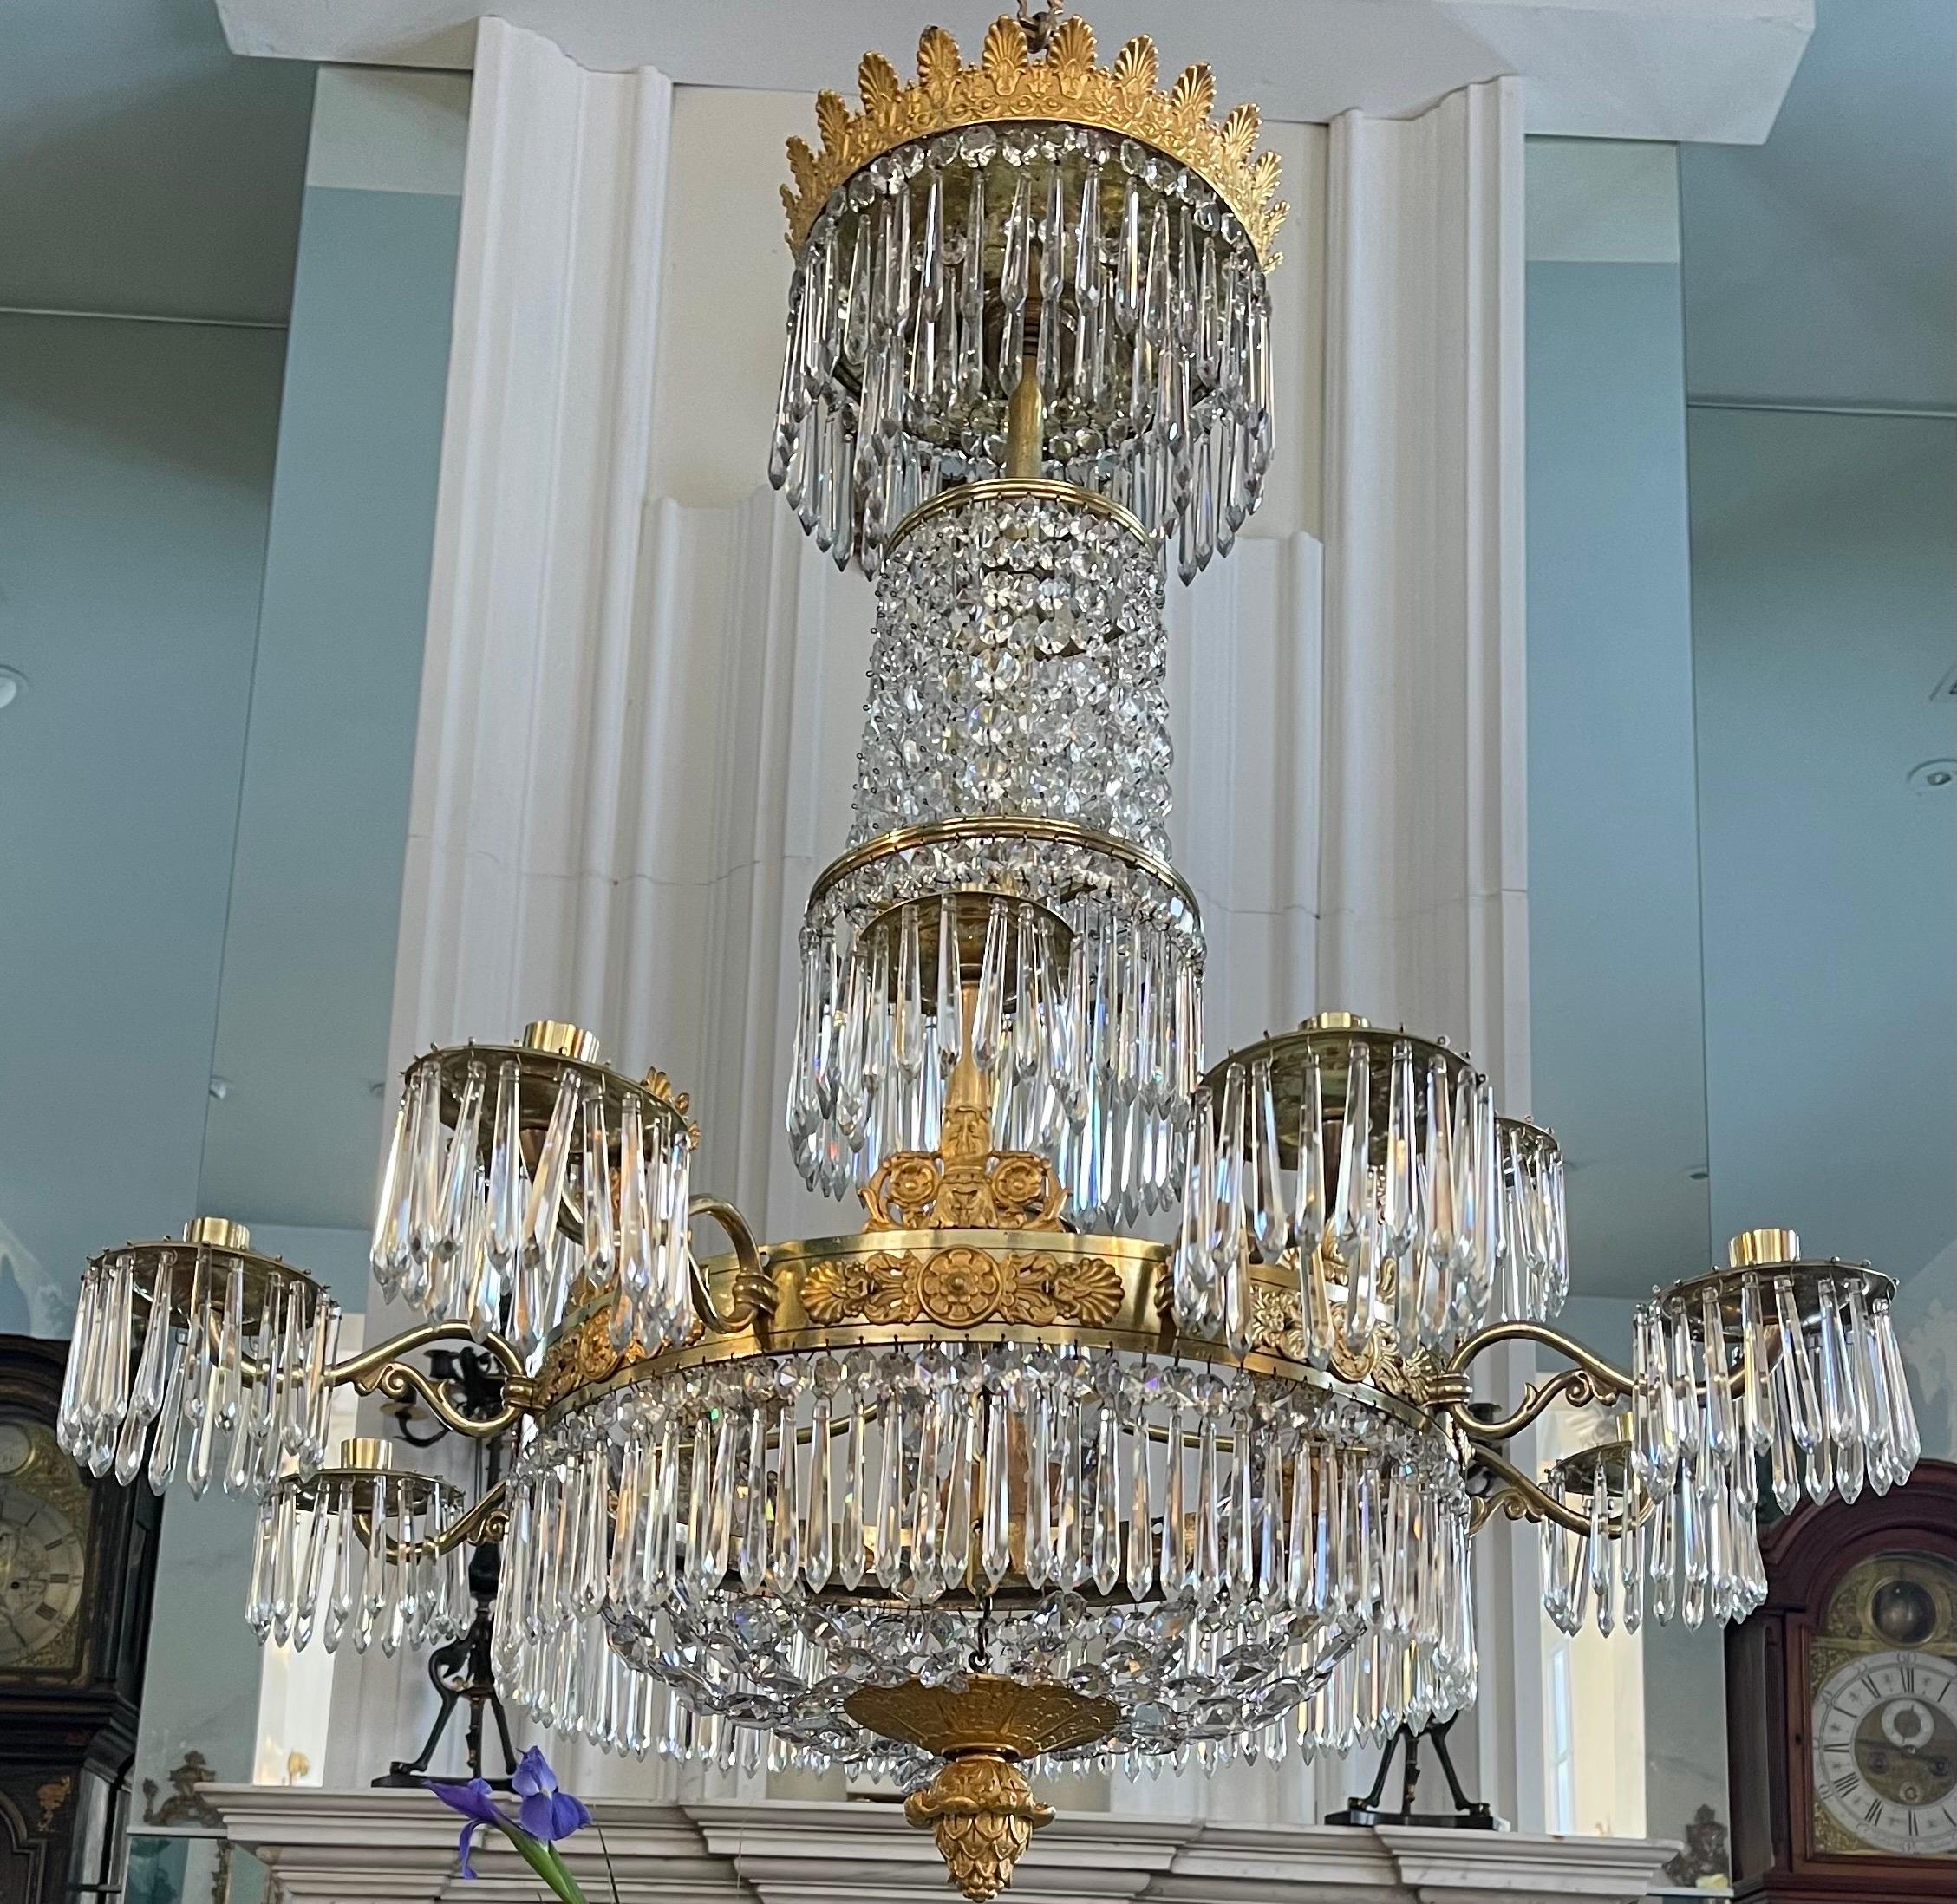 An elegant 12 arm French pendant from the 1st Empire Period. The lead crystal prisms are all original and have a subtle grey/purple hue. The chandelier resembles a four tier fountain. The two tone gold ormulu mounts depict Athenians and foliate